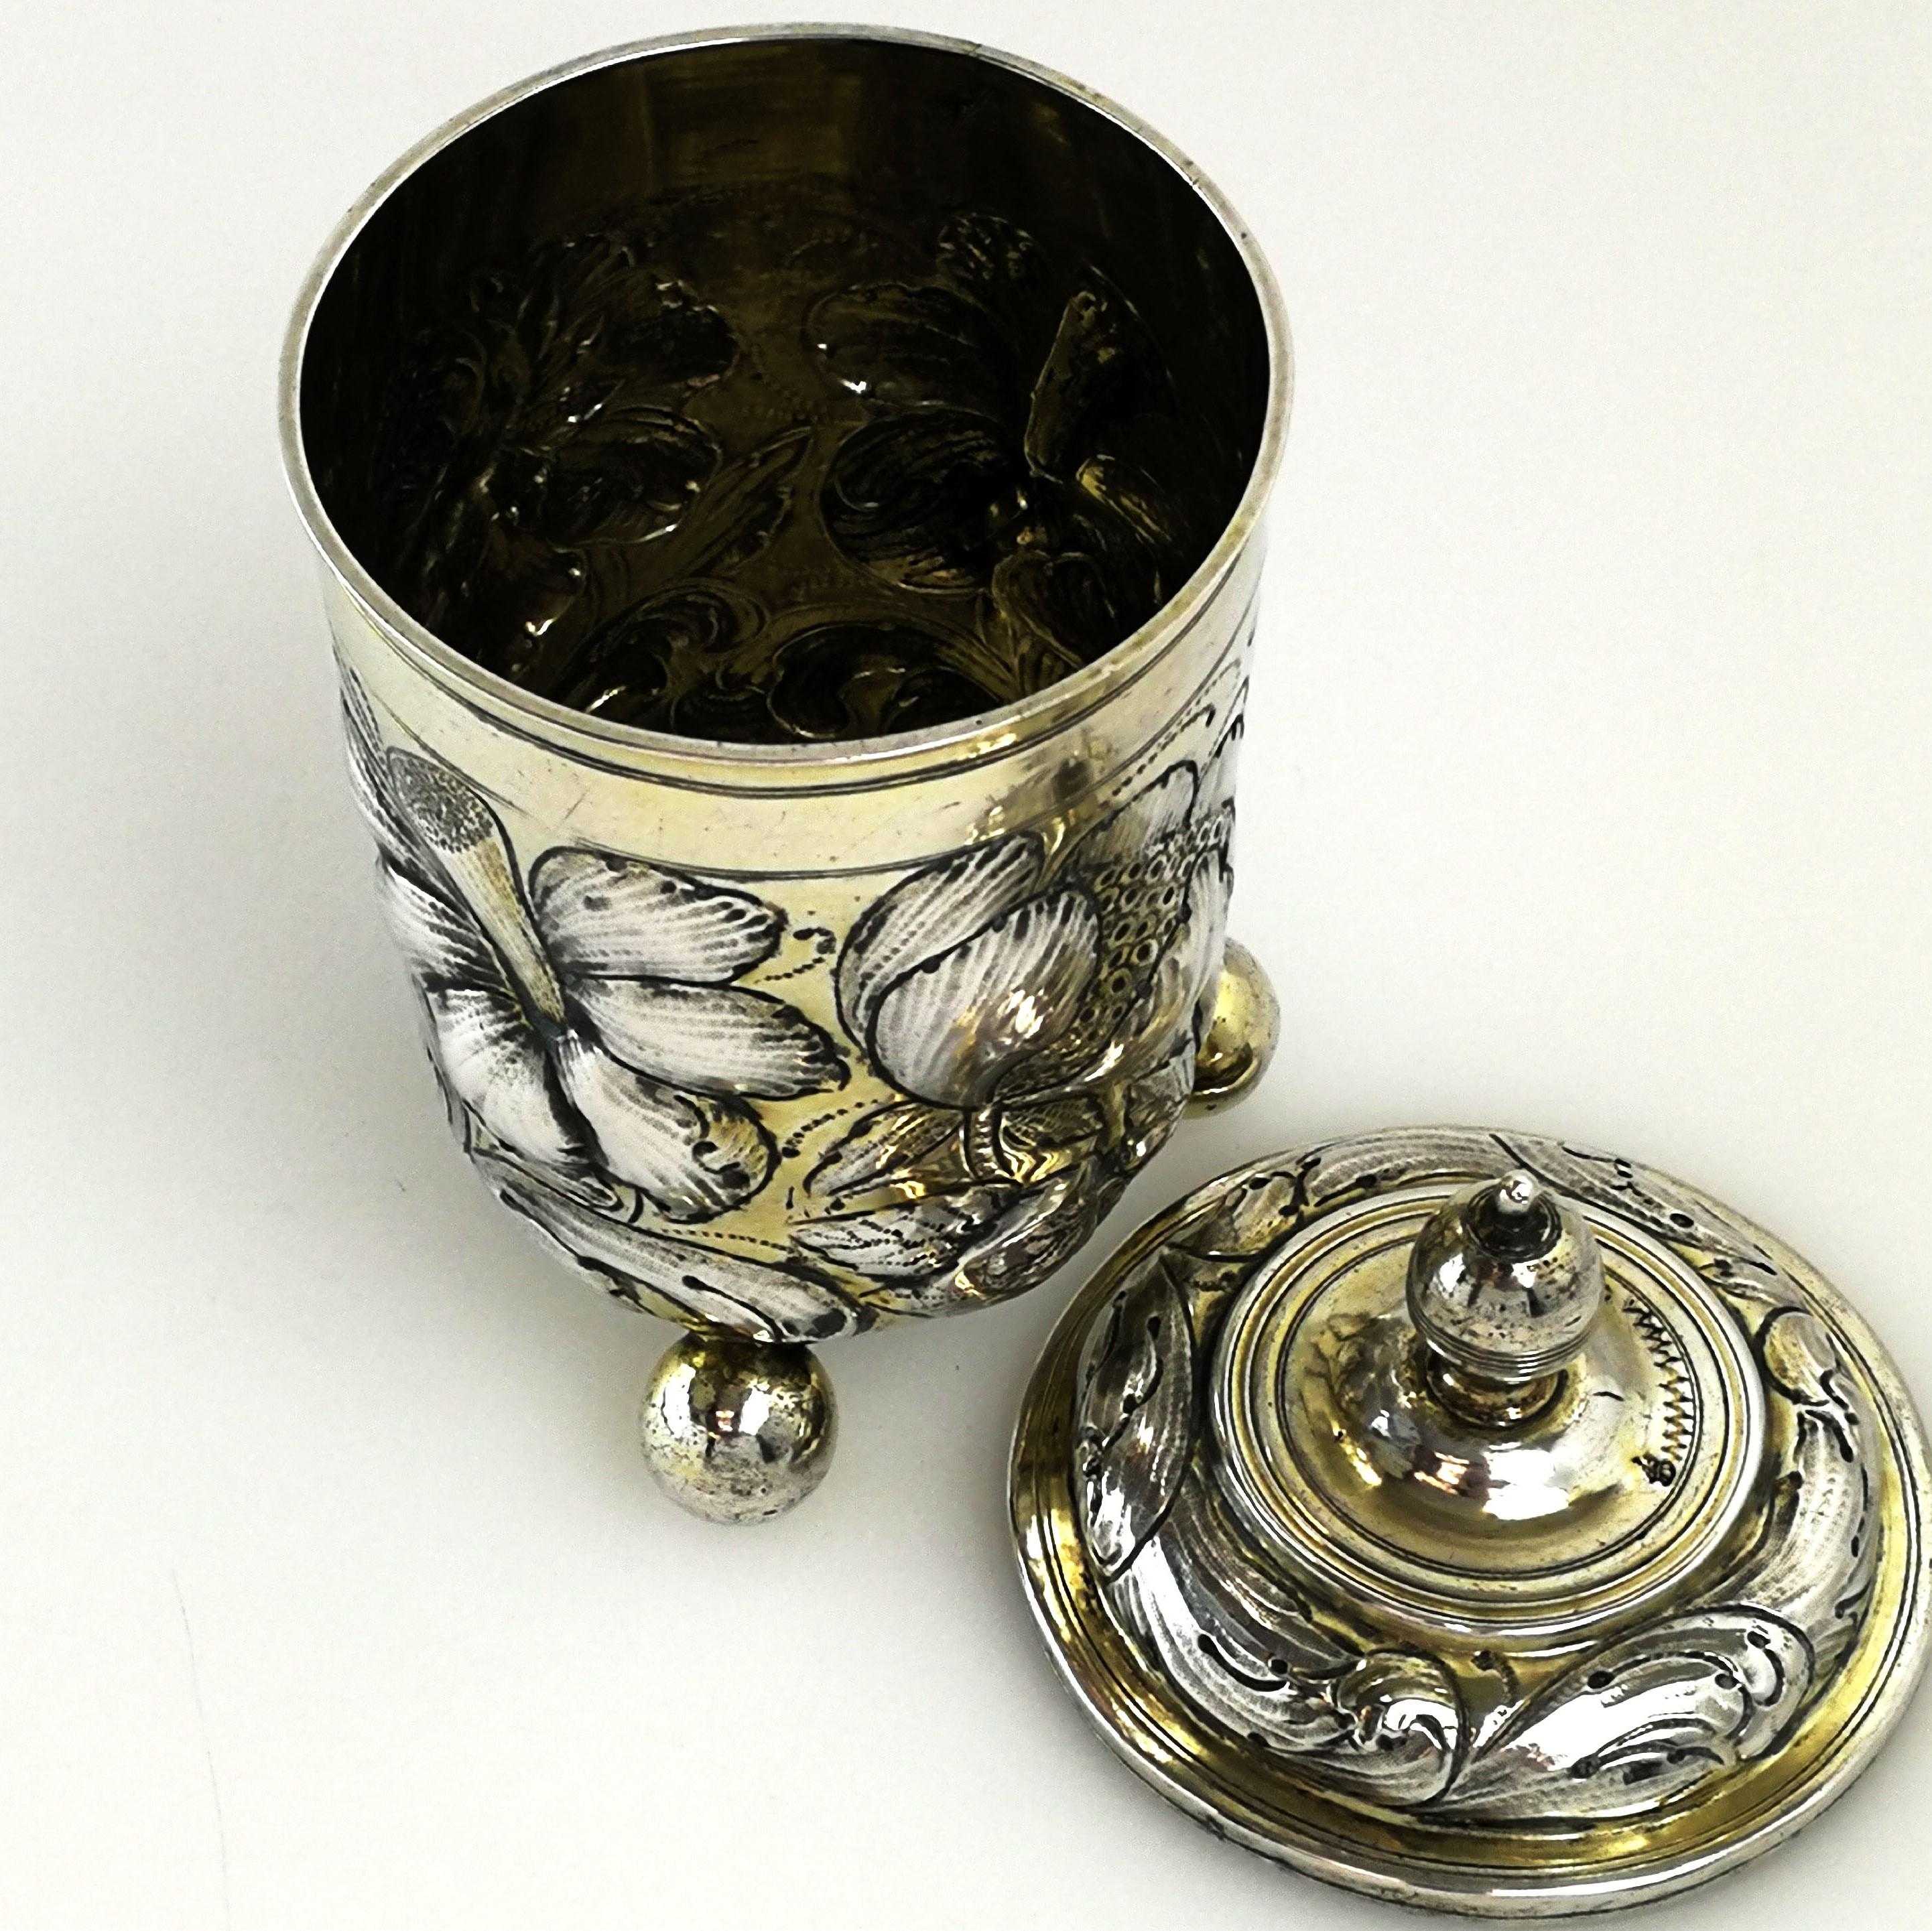 Antique Early German Silver Cup and Cover / Lidded Beaker circa 1680 Augsburg 2